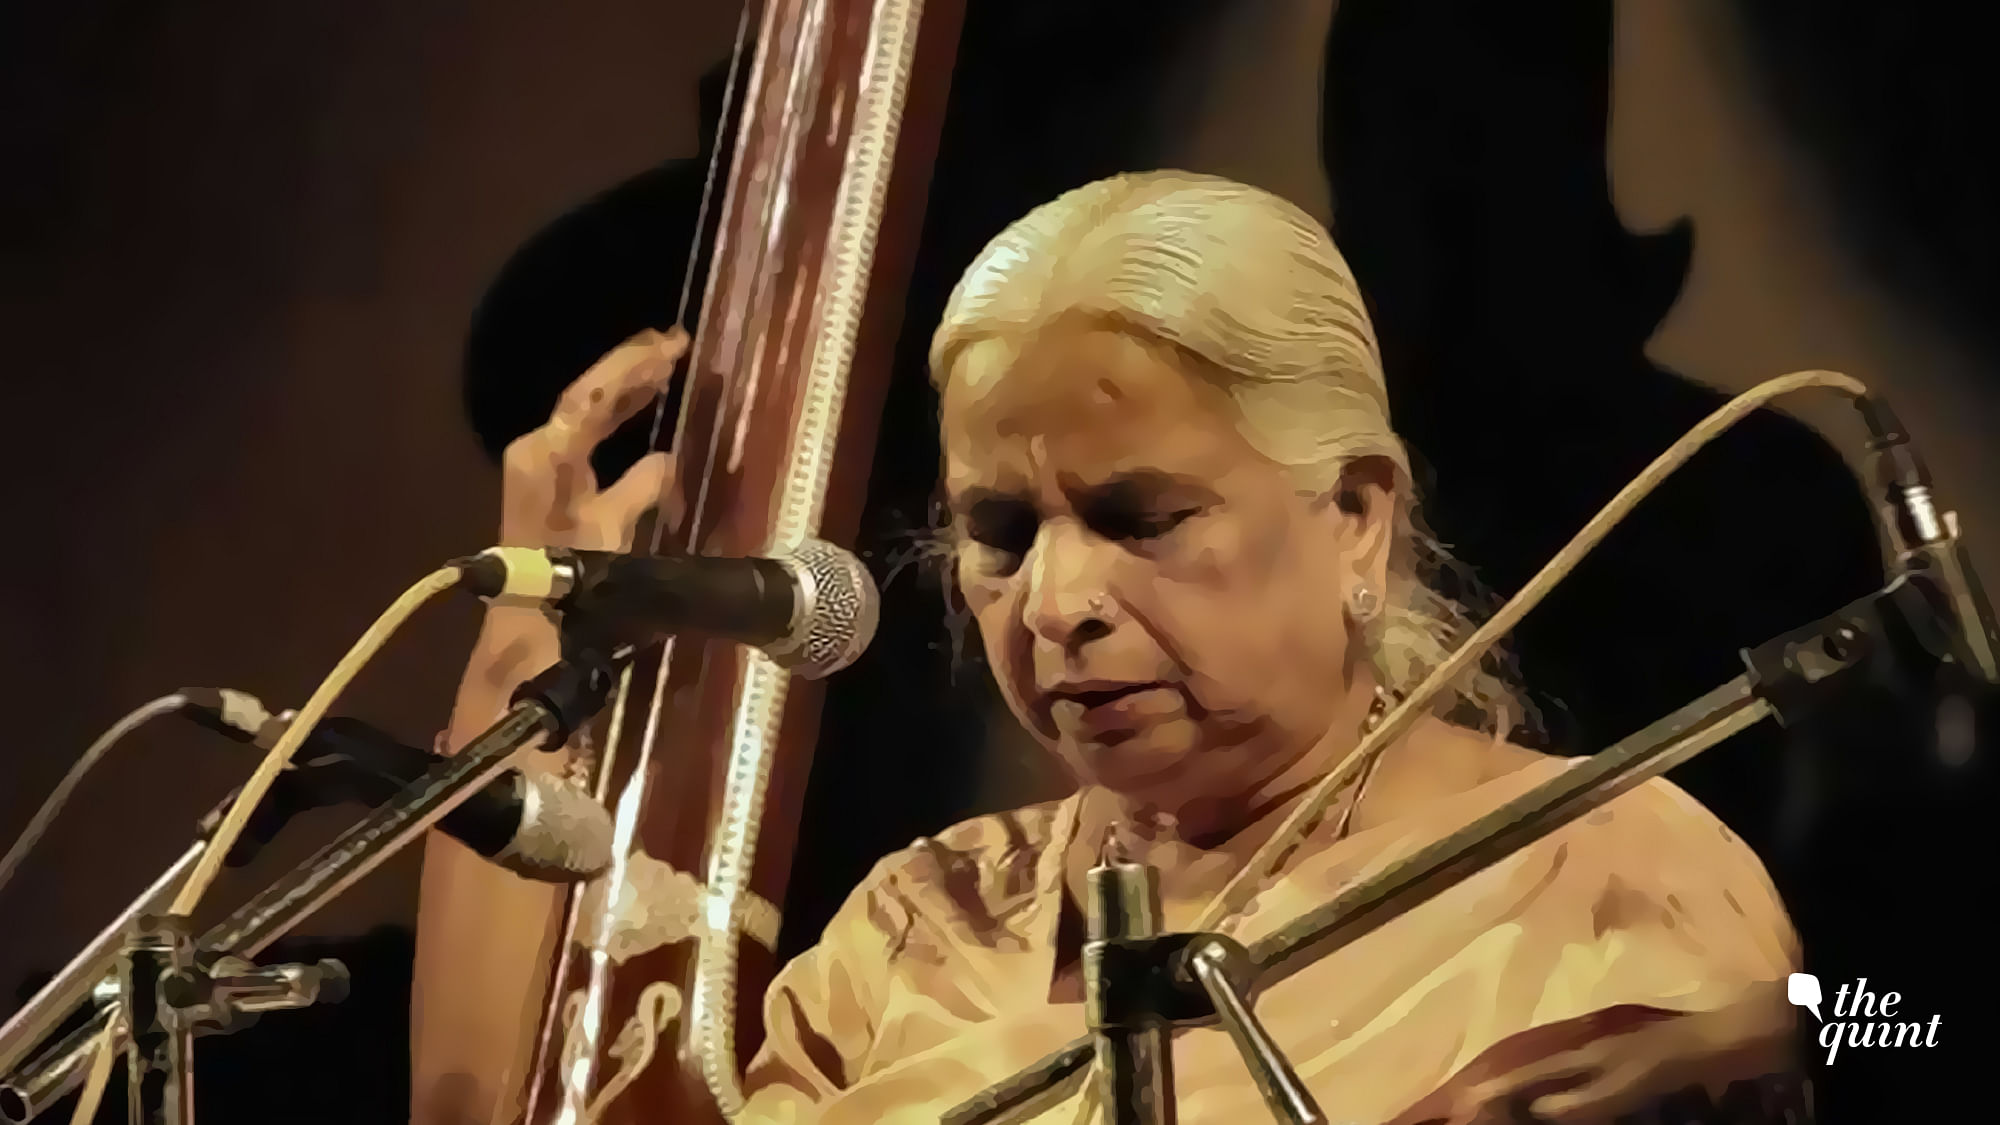 Girija Devi was known as the Queen of Thumri. She passed away in October last year.&nbsp;